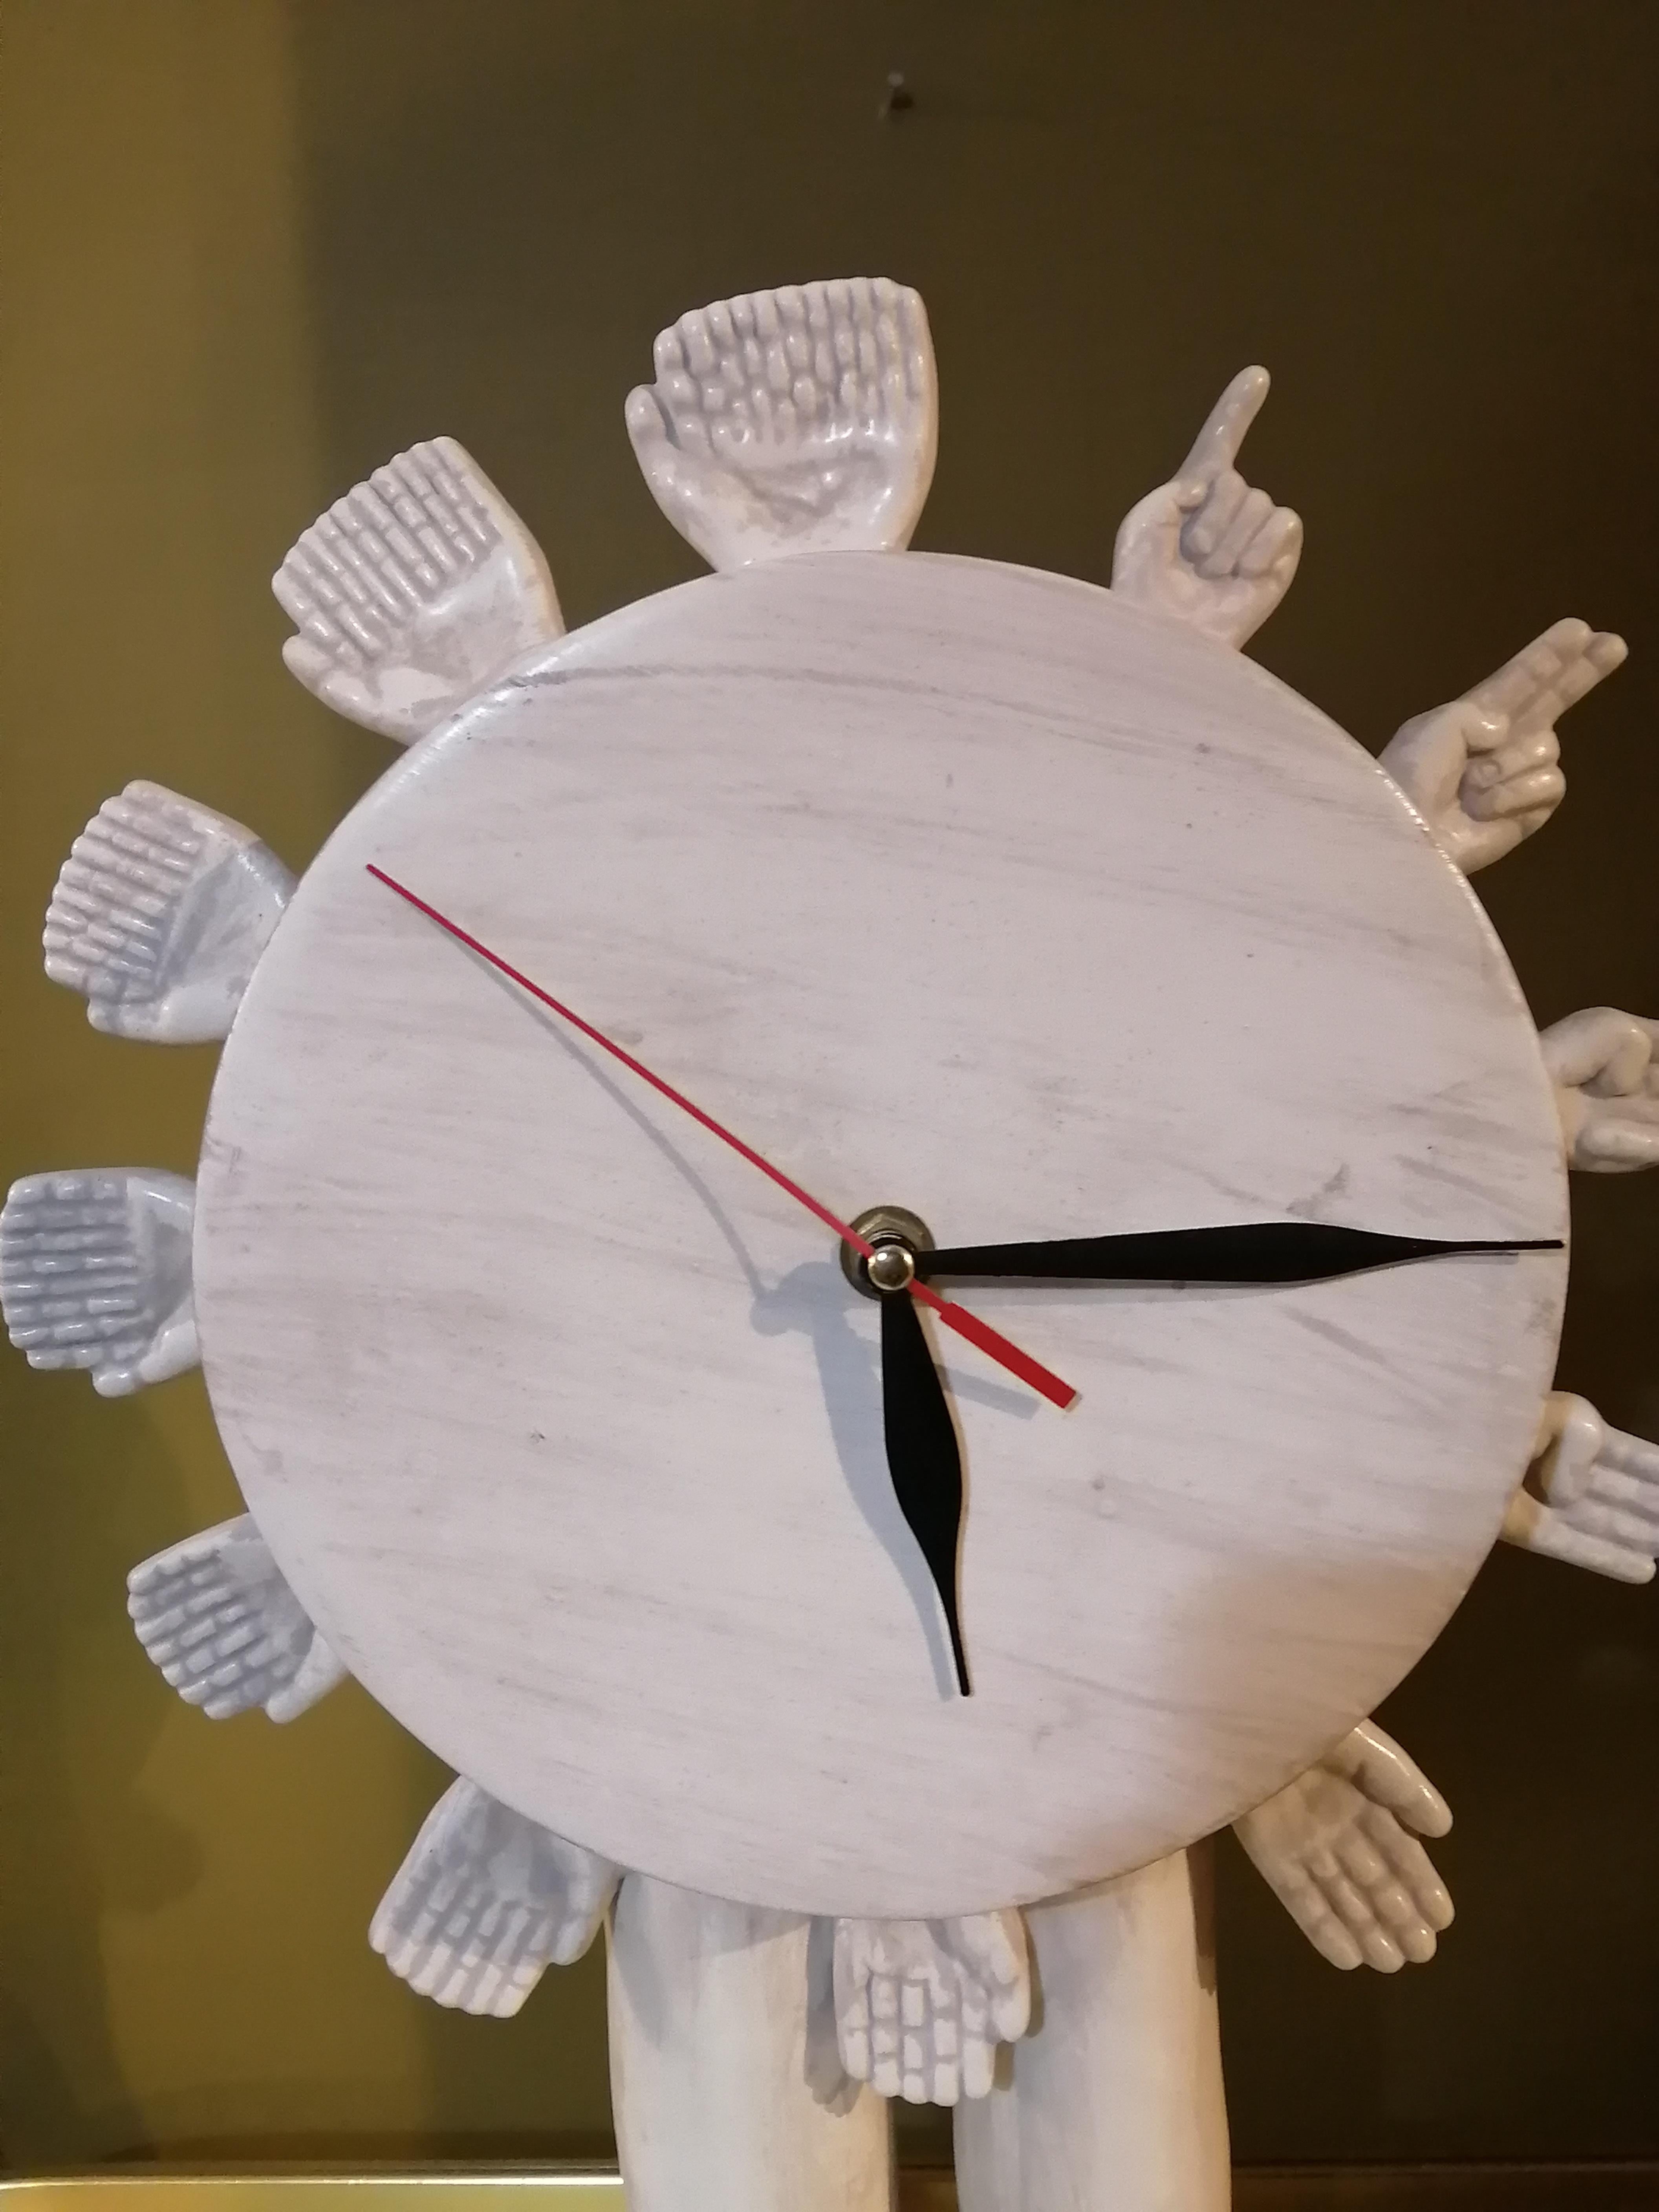 A surrealistic sculptural clock made in ceramic by Mexican artist Pedro Friedeberg. The clock's ceramic body has a marble finish. The clock's mechanism is a regular quartz movement for a AA battery. Signed on one of the legs.